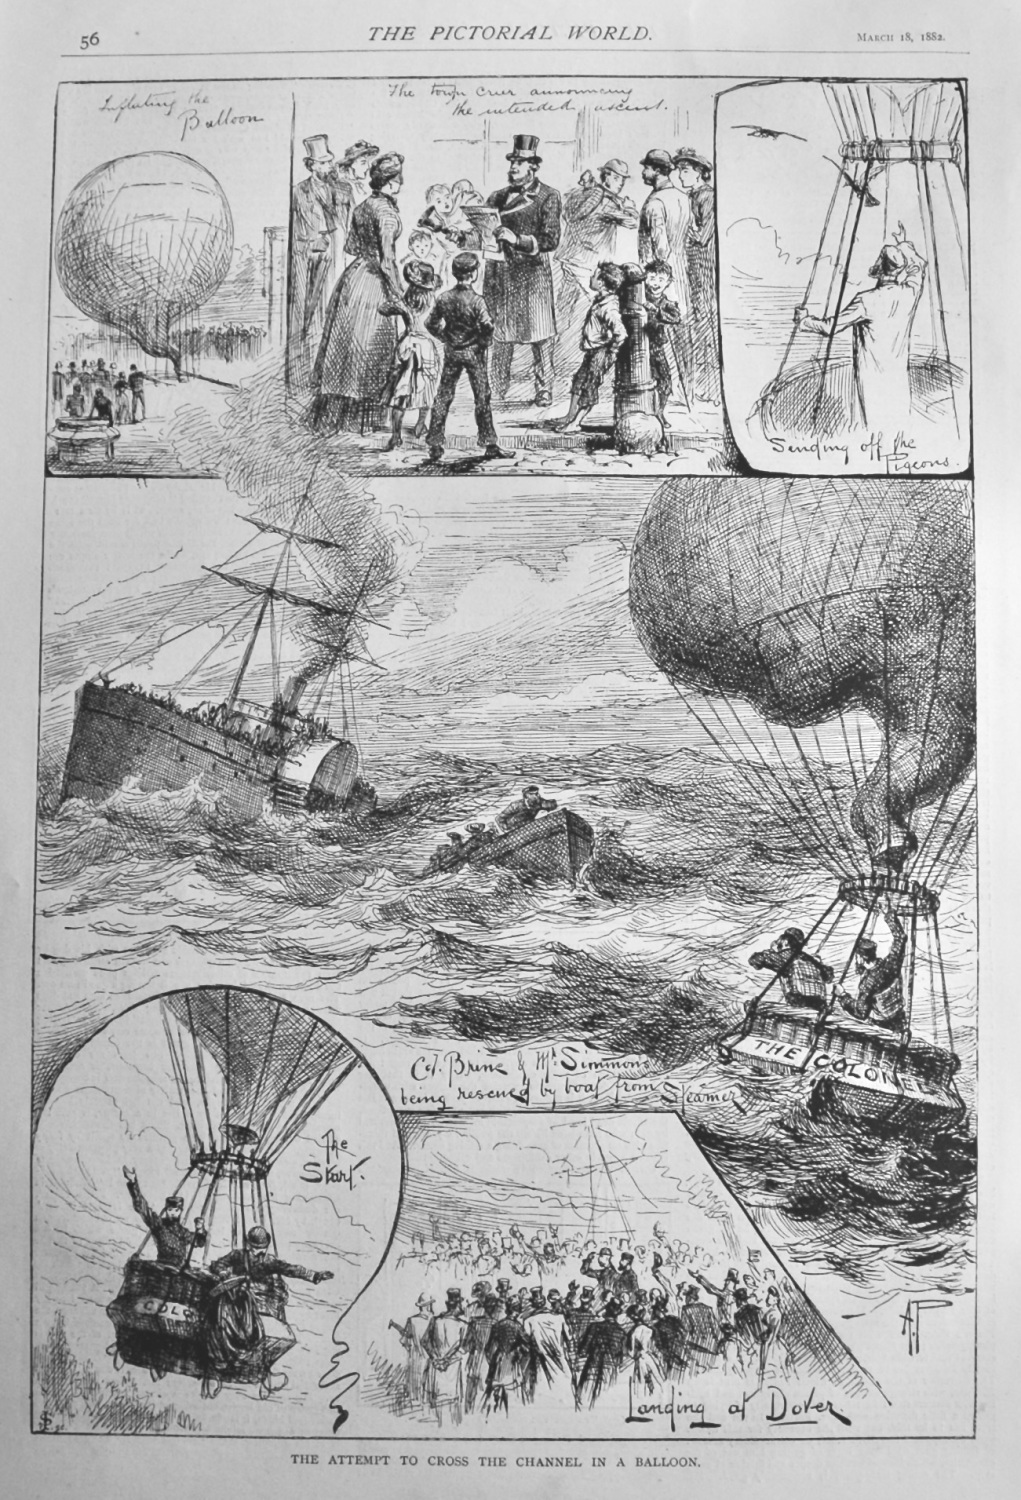 The Attempt to try to Cross the Channel in a Balloon.  1882.